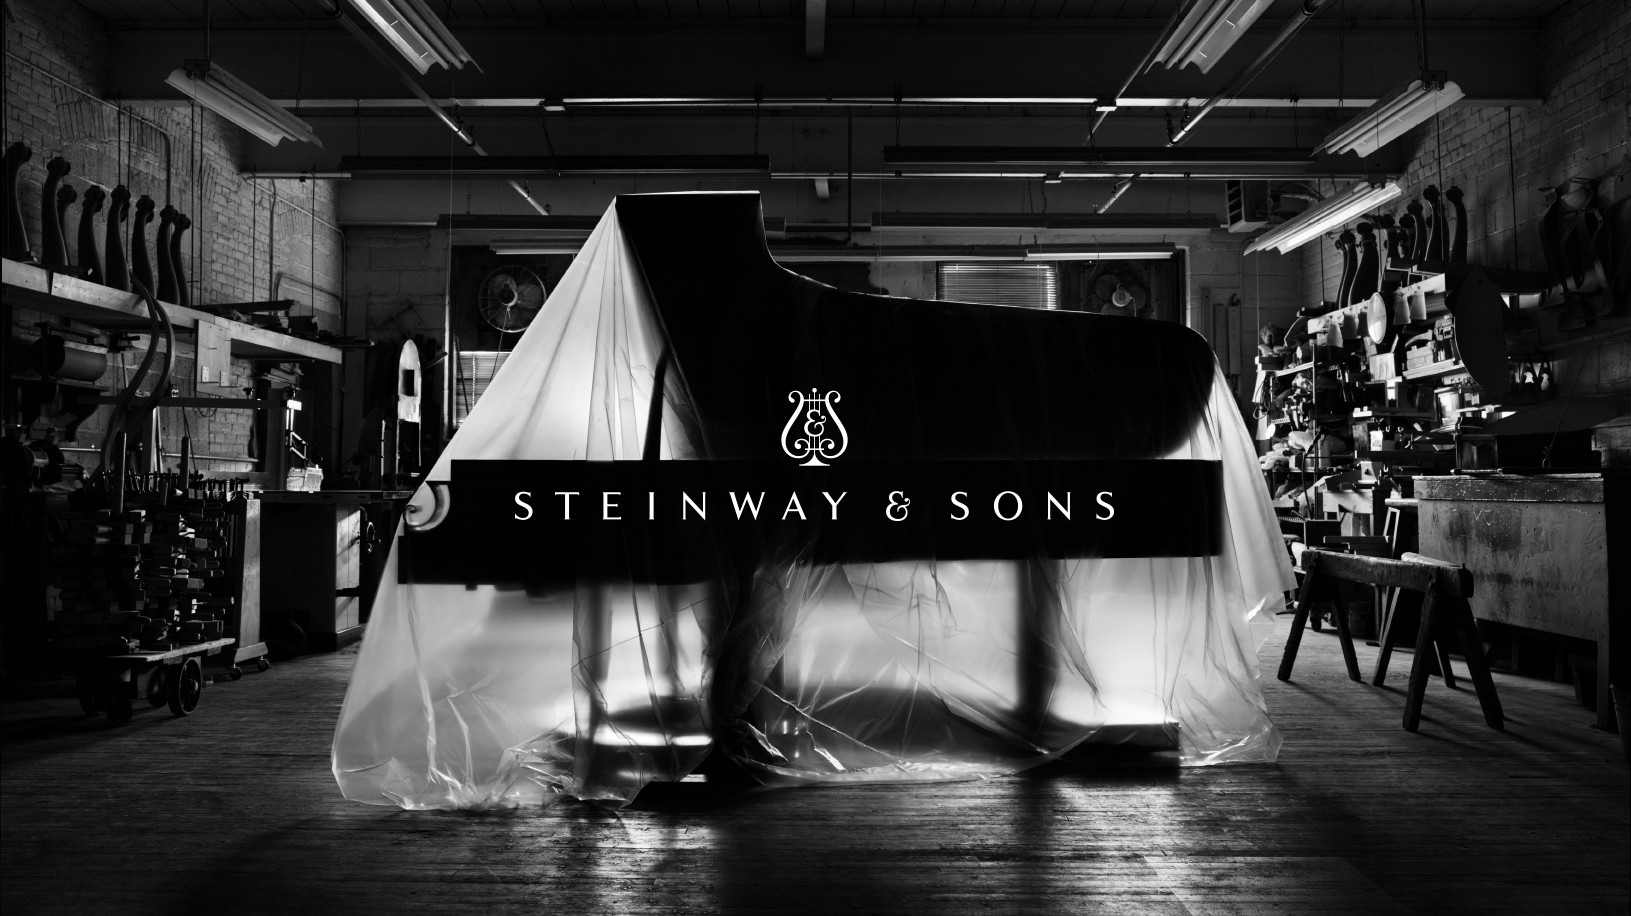 Steinway & Sons – 1 in 100,000 Brand Image and Logo